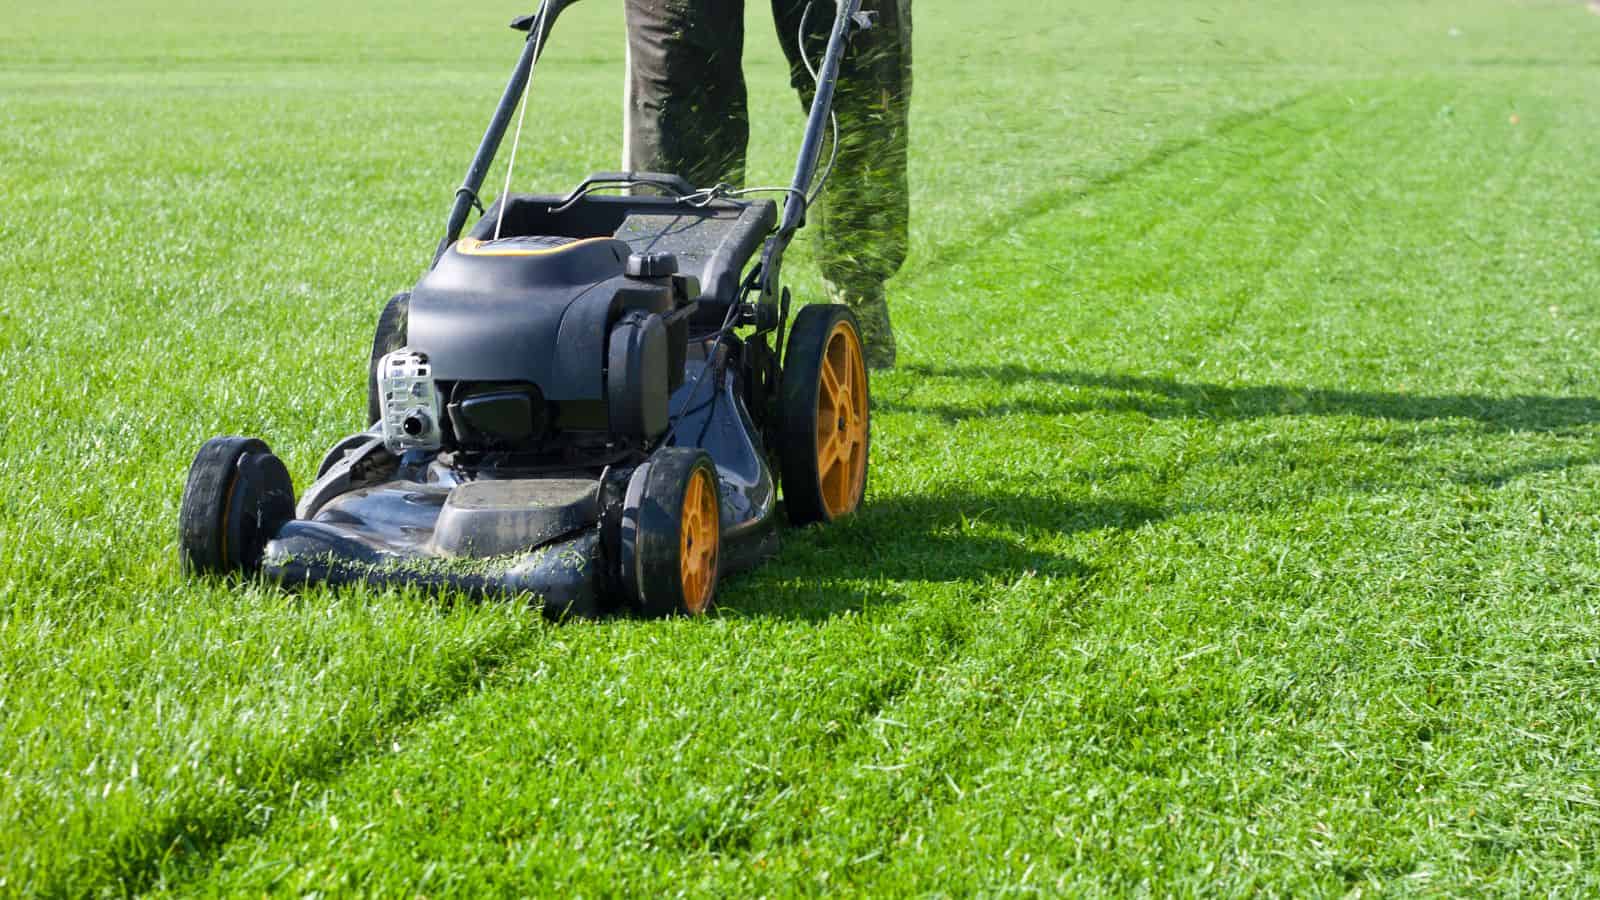 <p>Lawnmowers and trimmers are also commonly seen in many basements across the U.S. Rather than being kept outside, storage in basements saves these tools from harsh weather conditions, vandalism, or theft—all achieved while maintaining convenient access to them.</p>